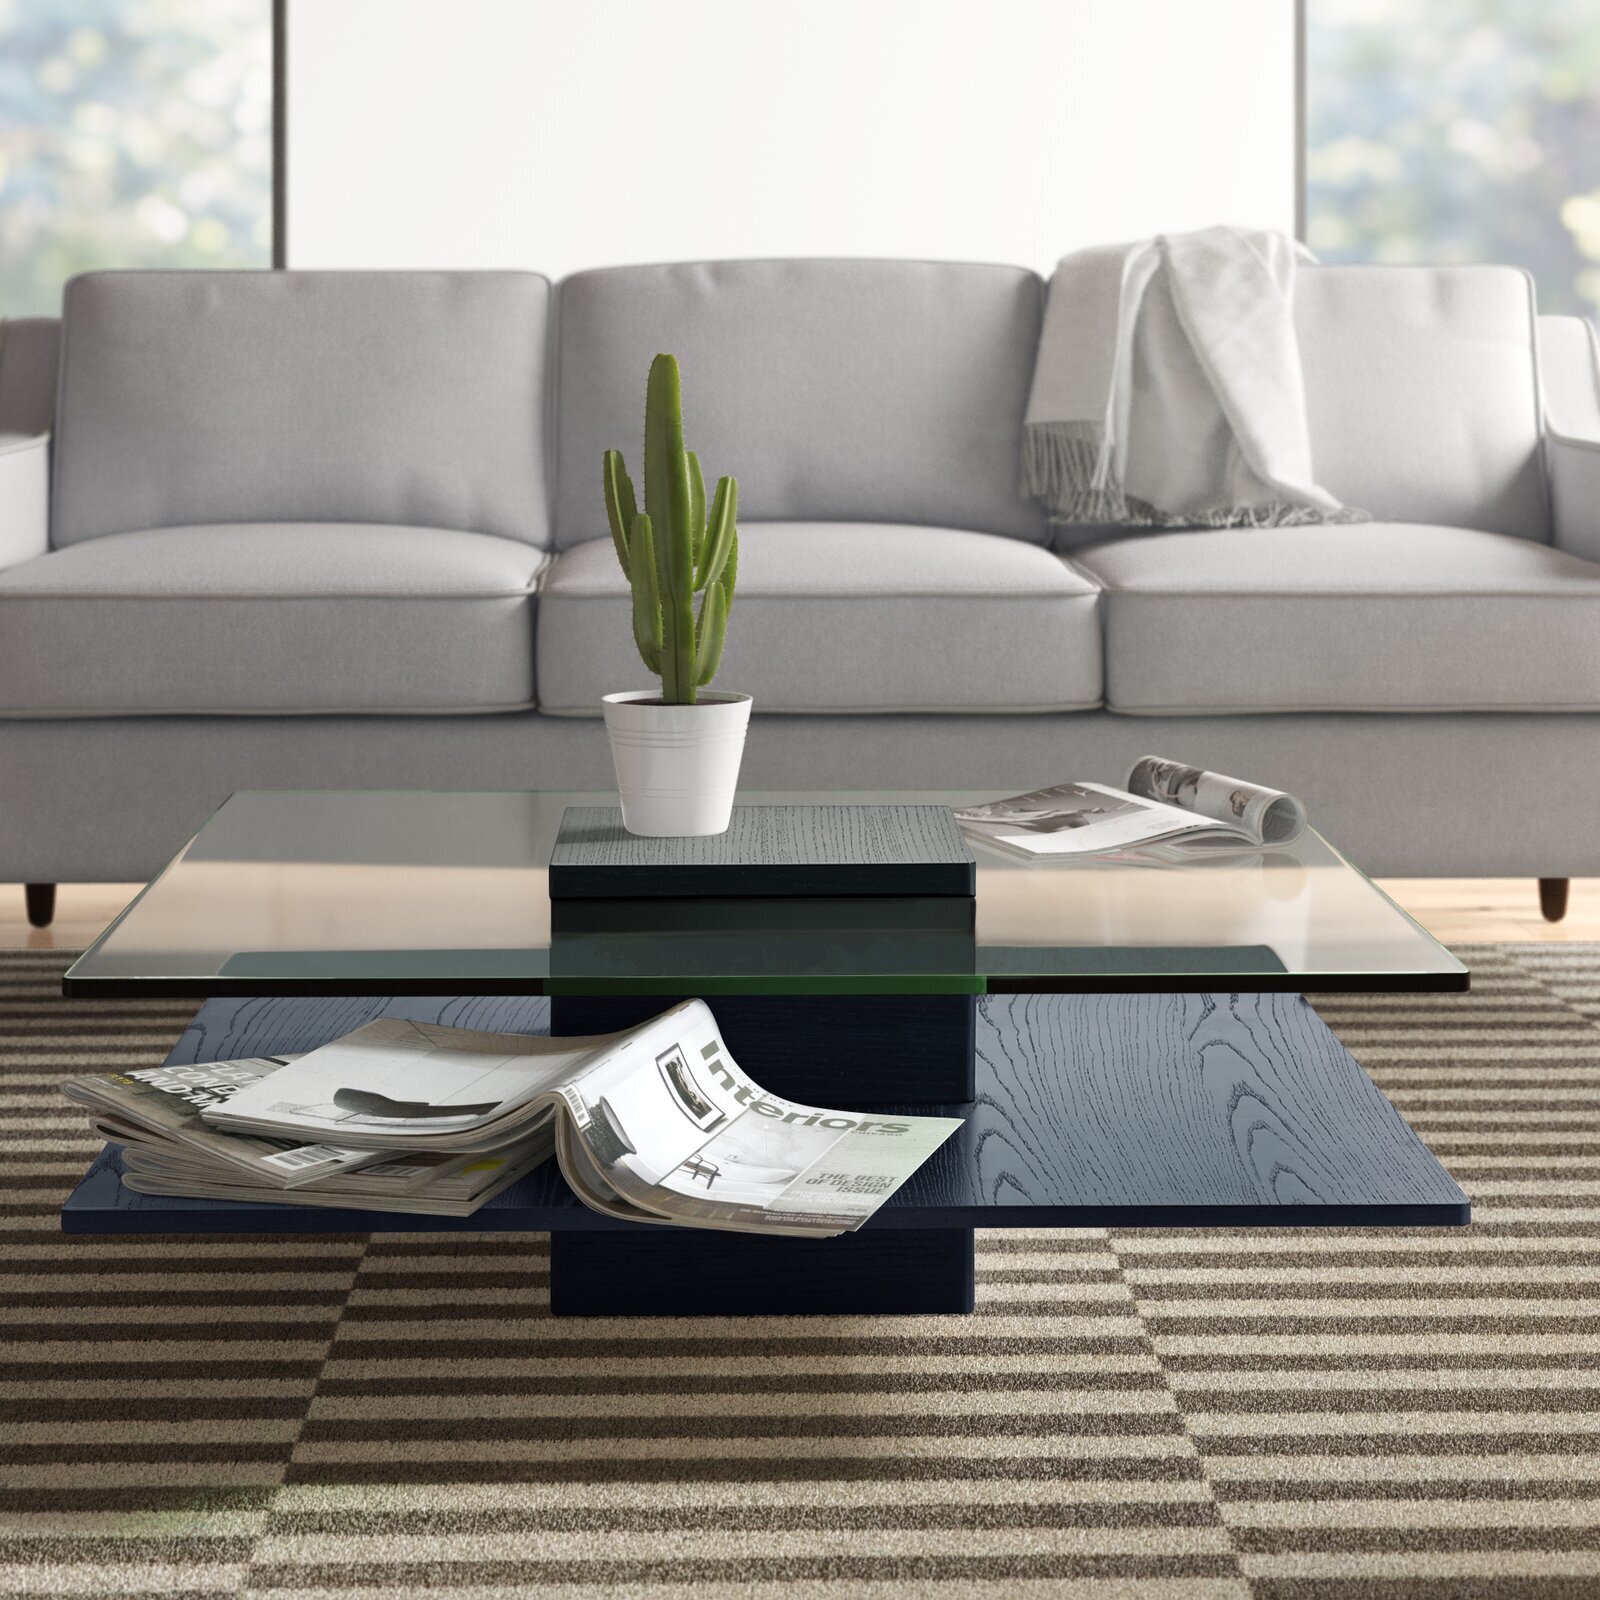 Square coffee table with a black bottom and glass surface